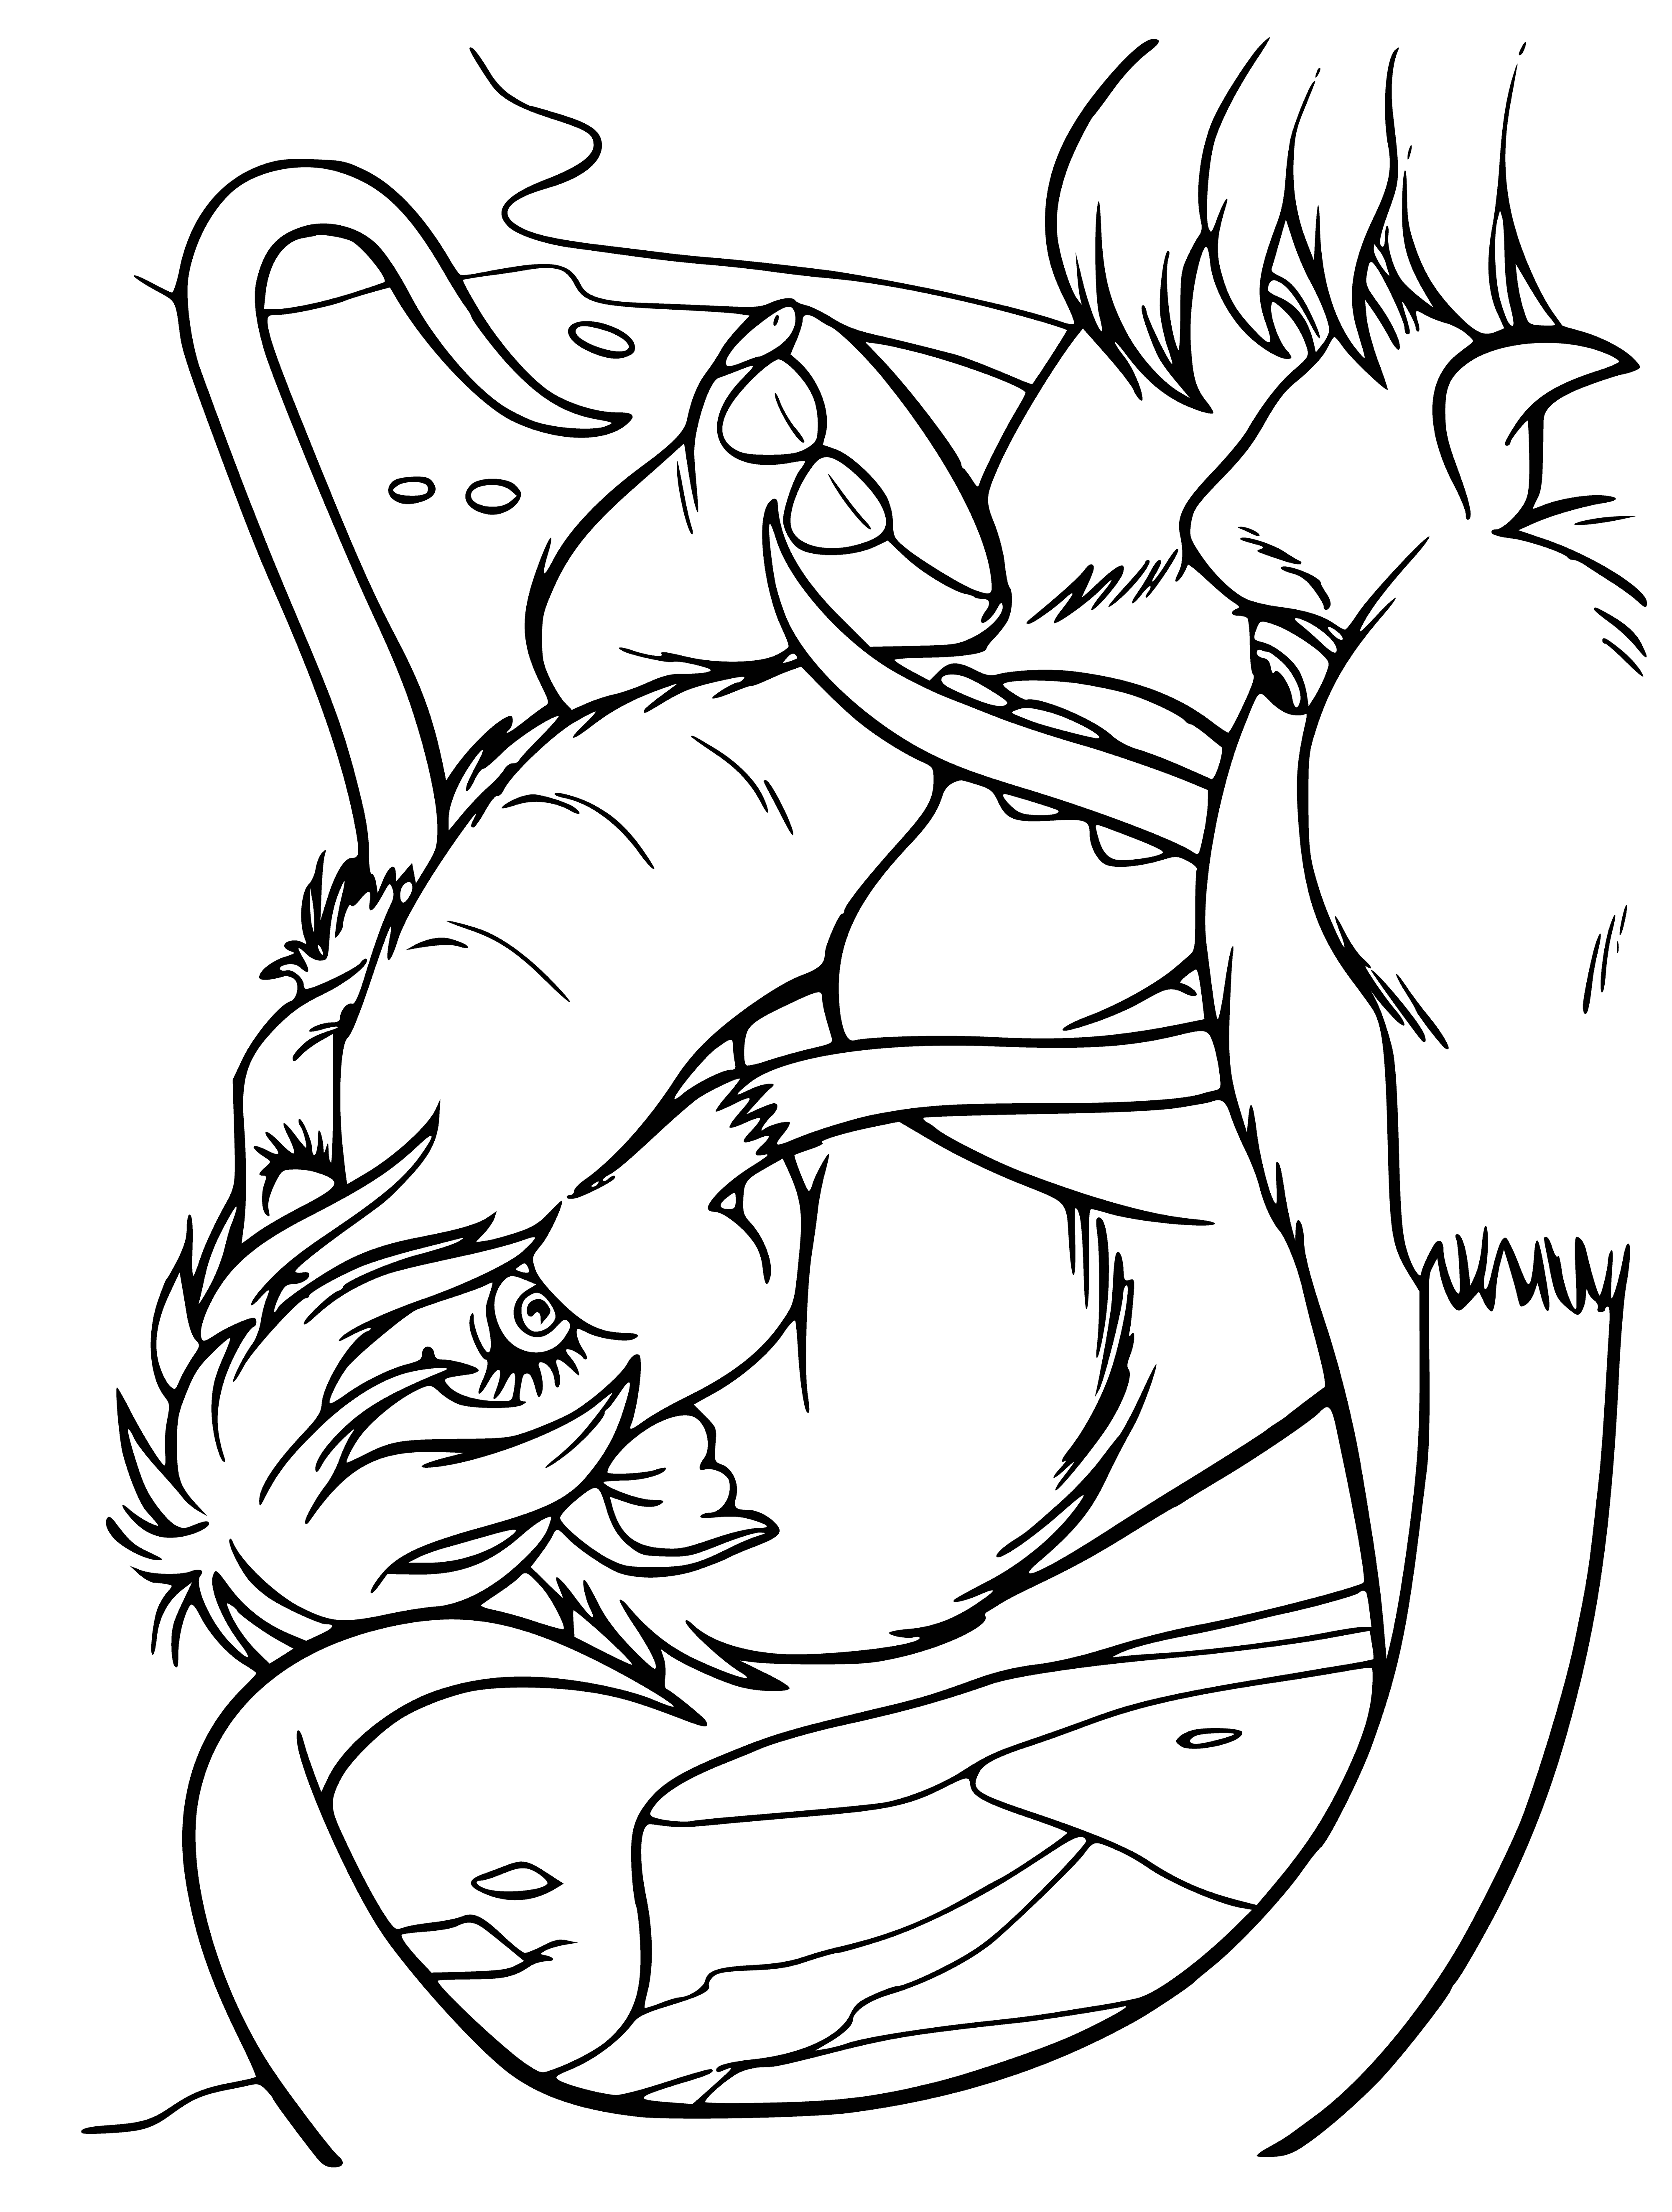 coloring page: Manny and Ellie meet and hit it off; he's a big softie and she's just his type. They look forward to getting to know each other better.